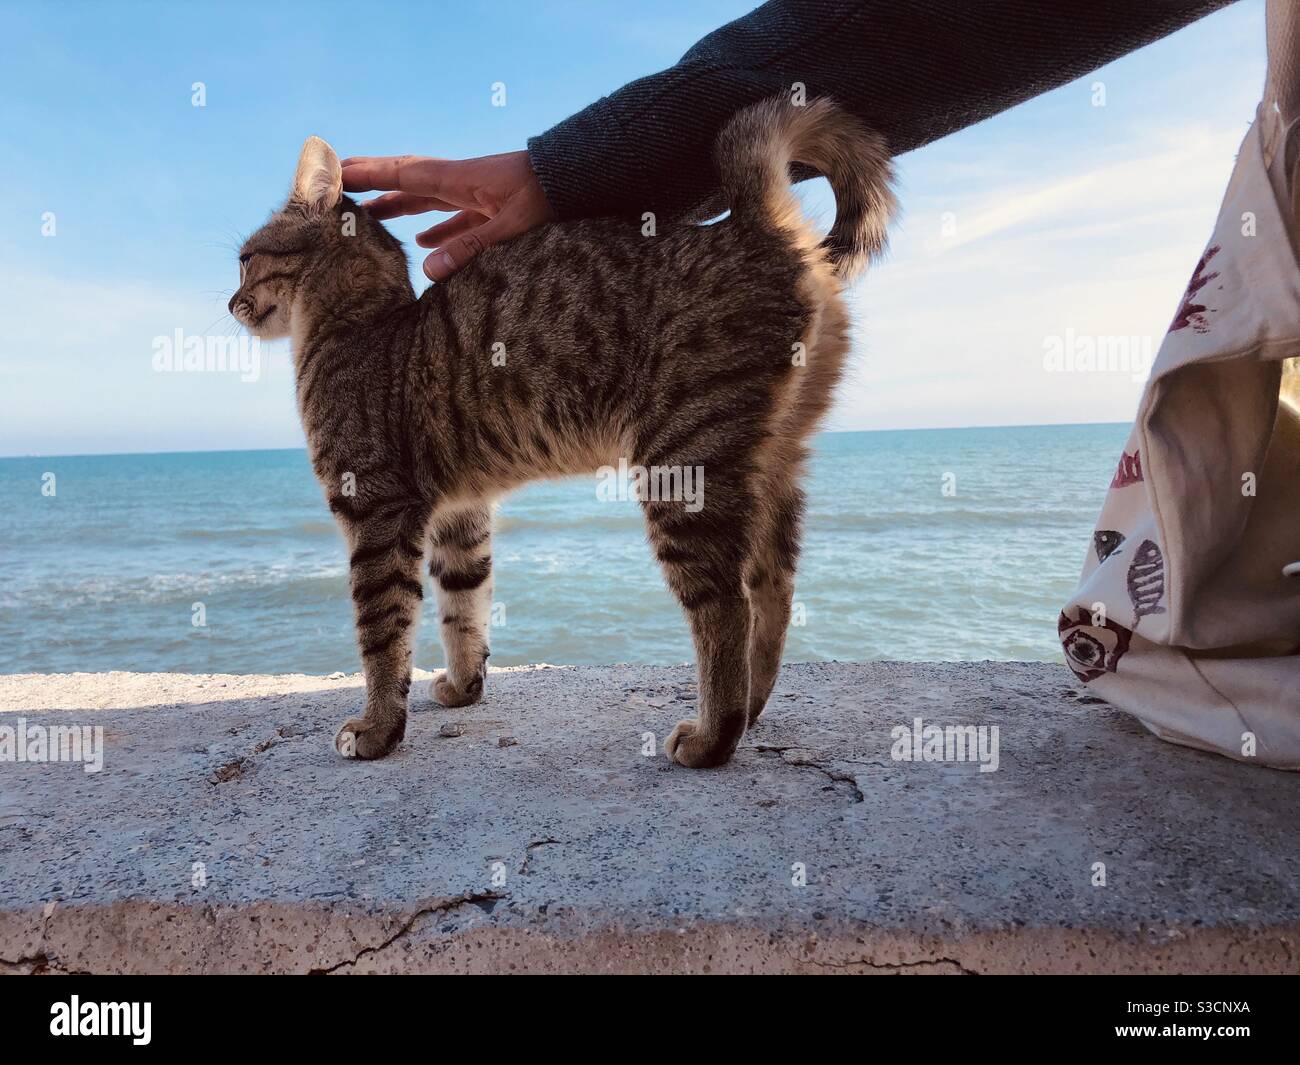 Man caressing a stray cat by the sea Stock Photo